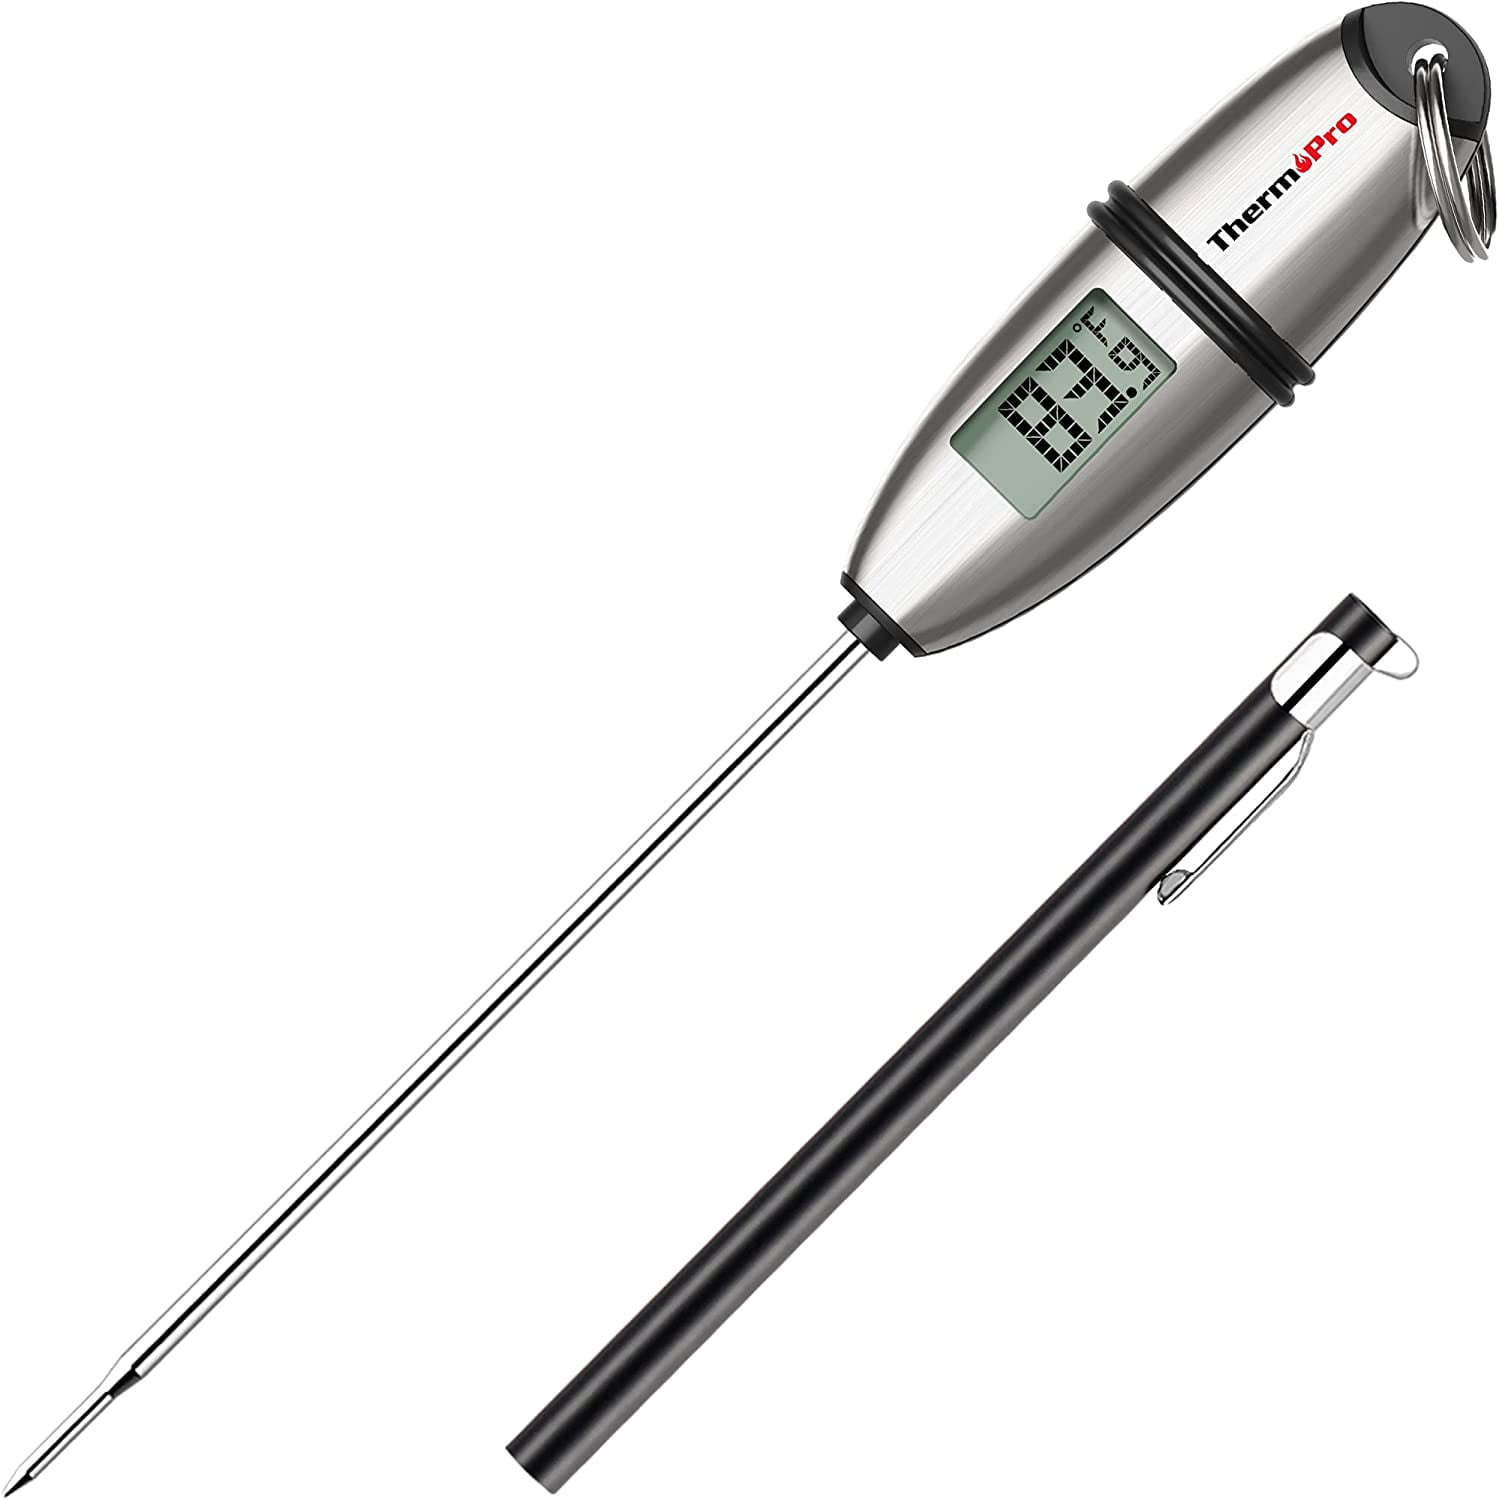 ThermoPro TP605W Waterproof Digital Instant Read Meat Thermometer Food  Candy Cooking Kitchen Thermometer with Magnet and Backlight TP605W - The  Home Depot